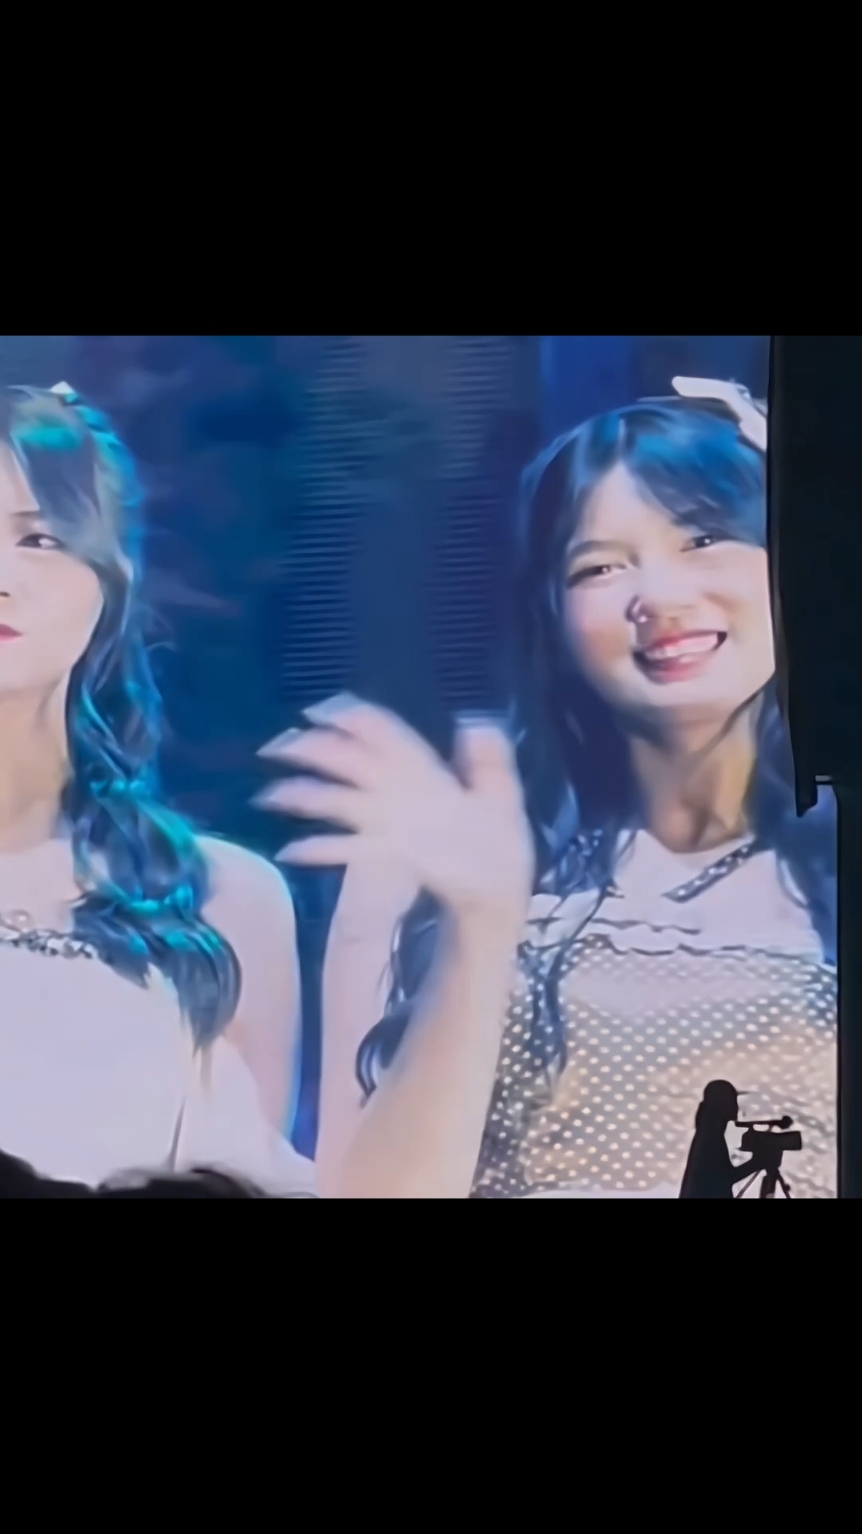 the sound that i've been missing. (videos not mine, all credits to owner who i appreciate took this lil moments🥰) #indirajkt48 #jkt48indira #jkt48 